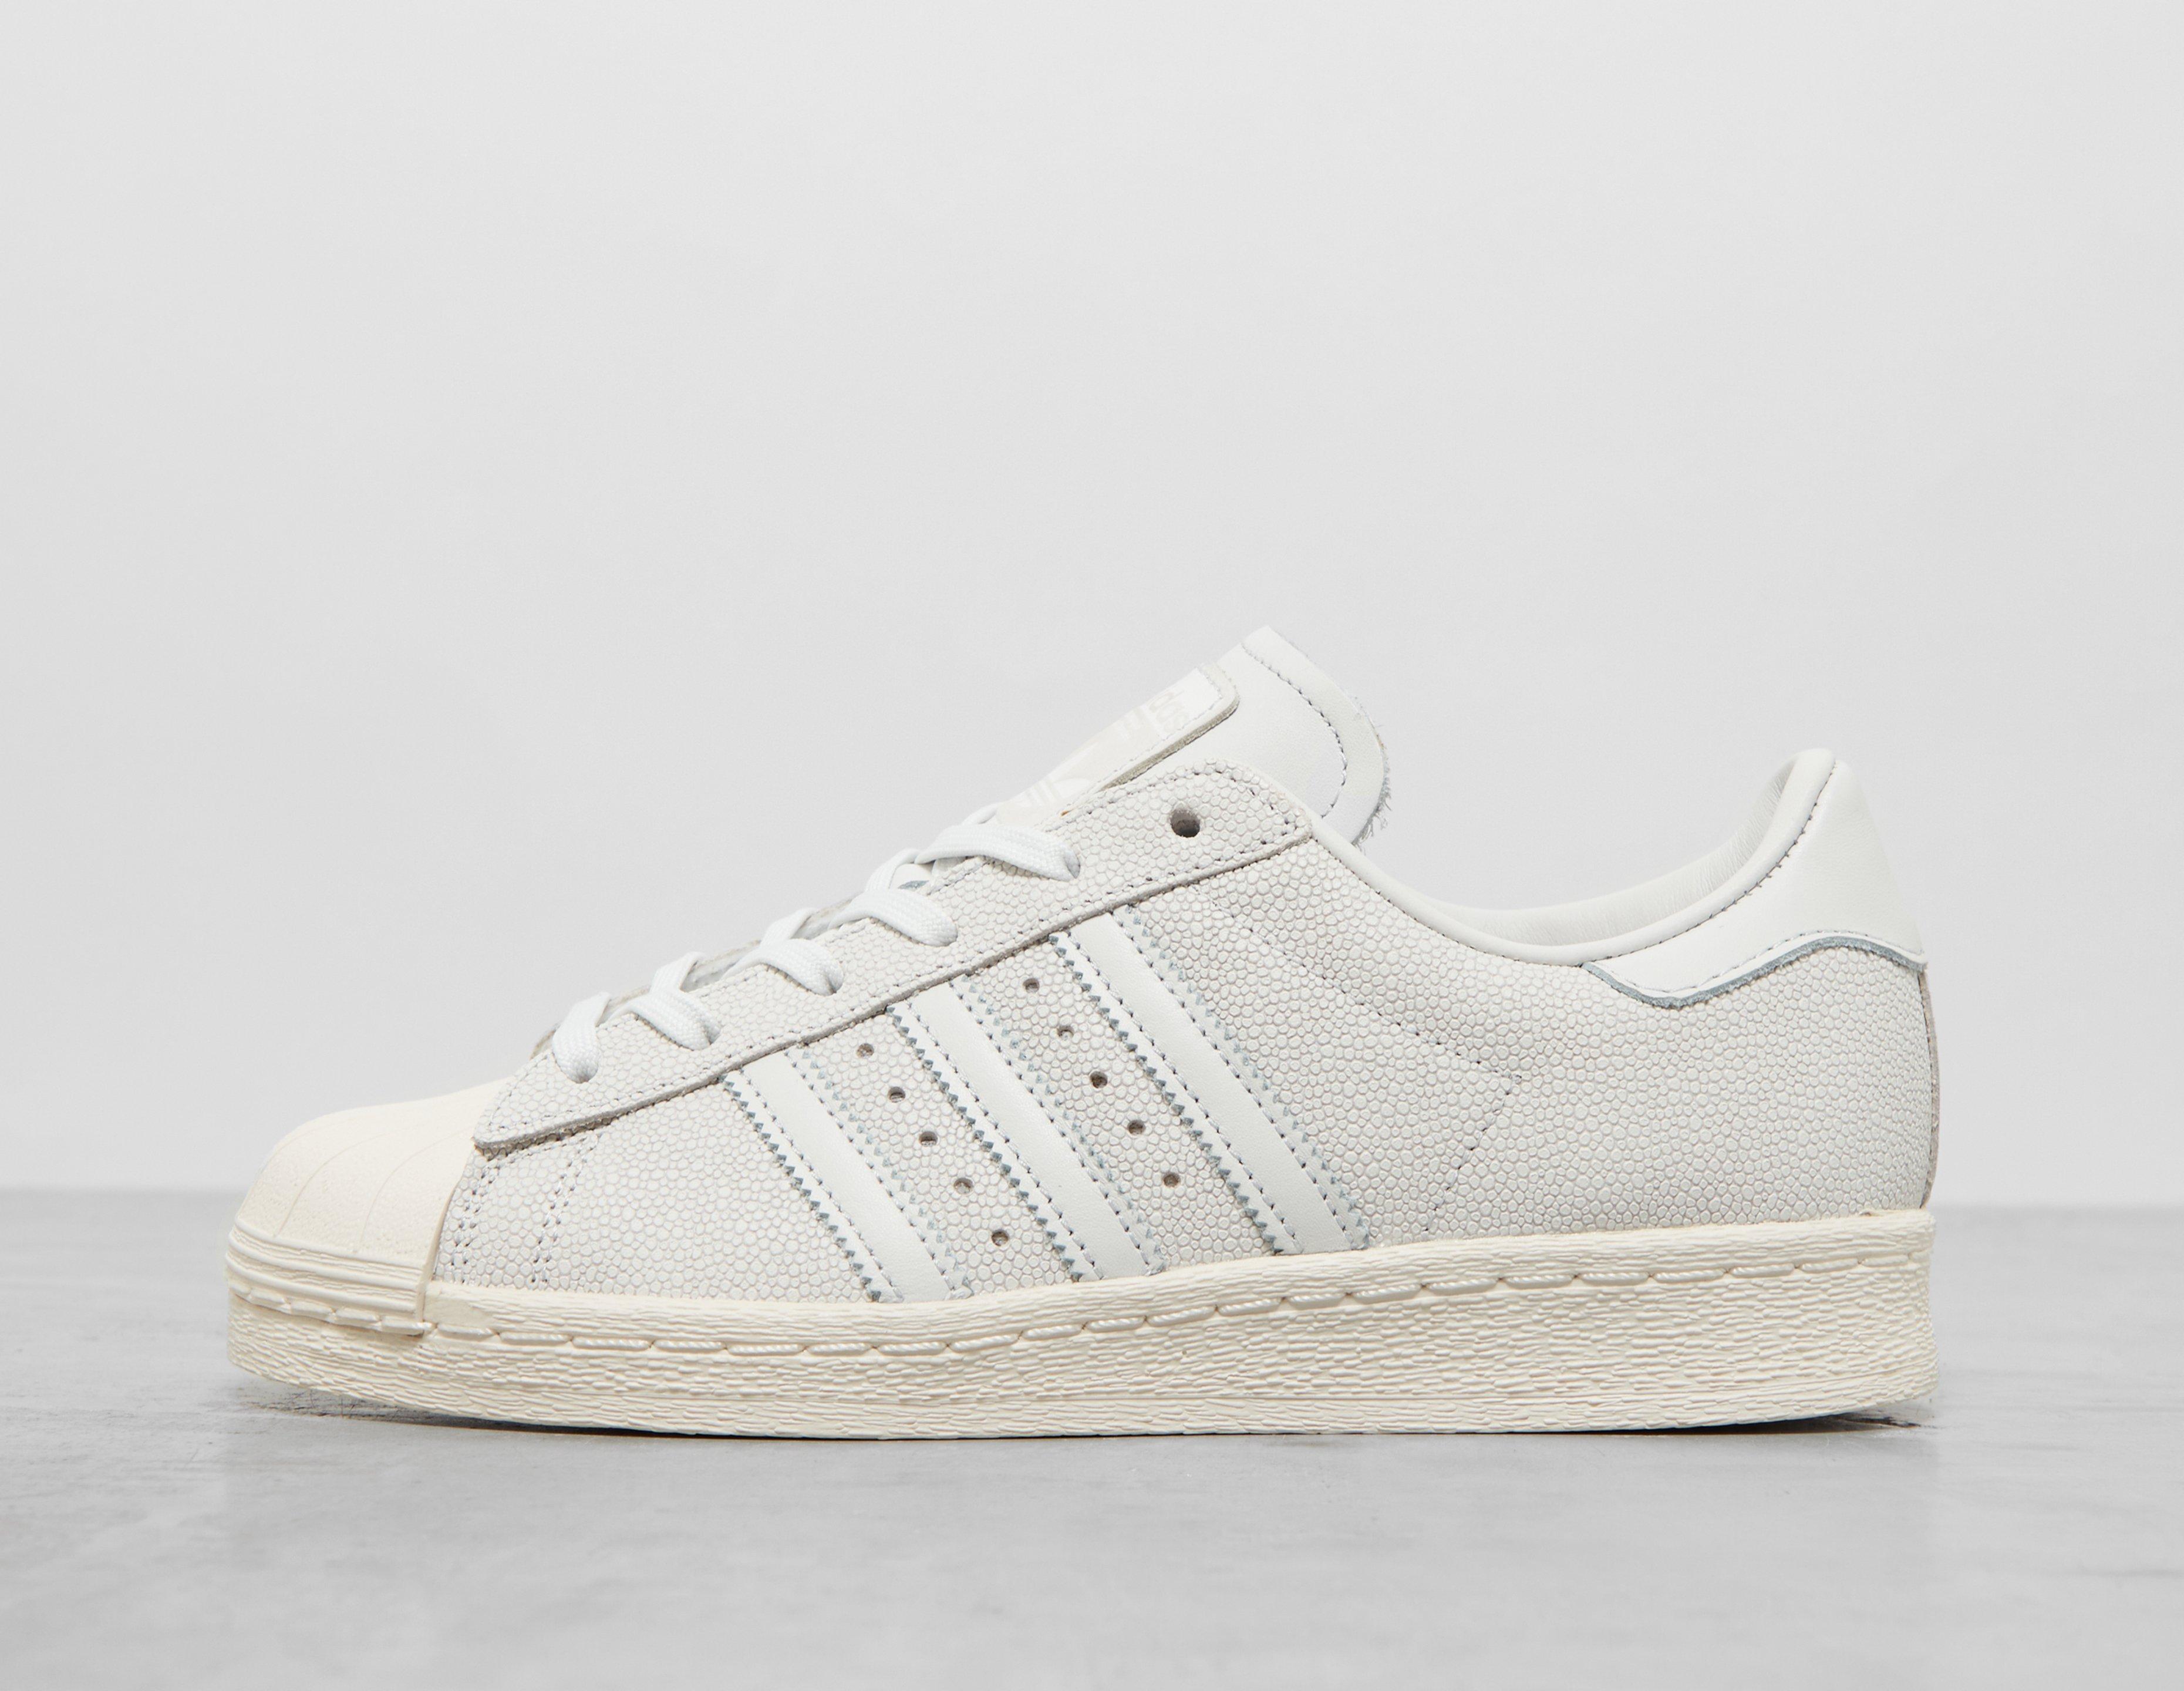 originals adicolor commercial Women\'s with champs White piping | adidas Superstar x Originals adidas | HealthdesignShops 82 pack